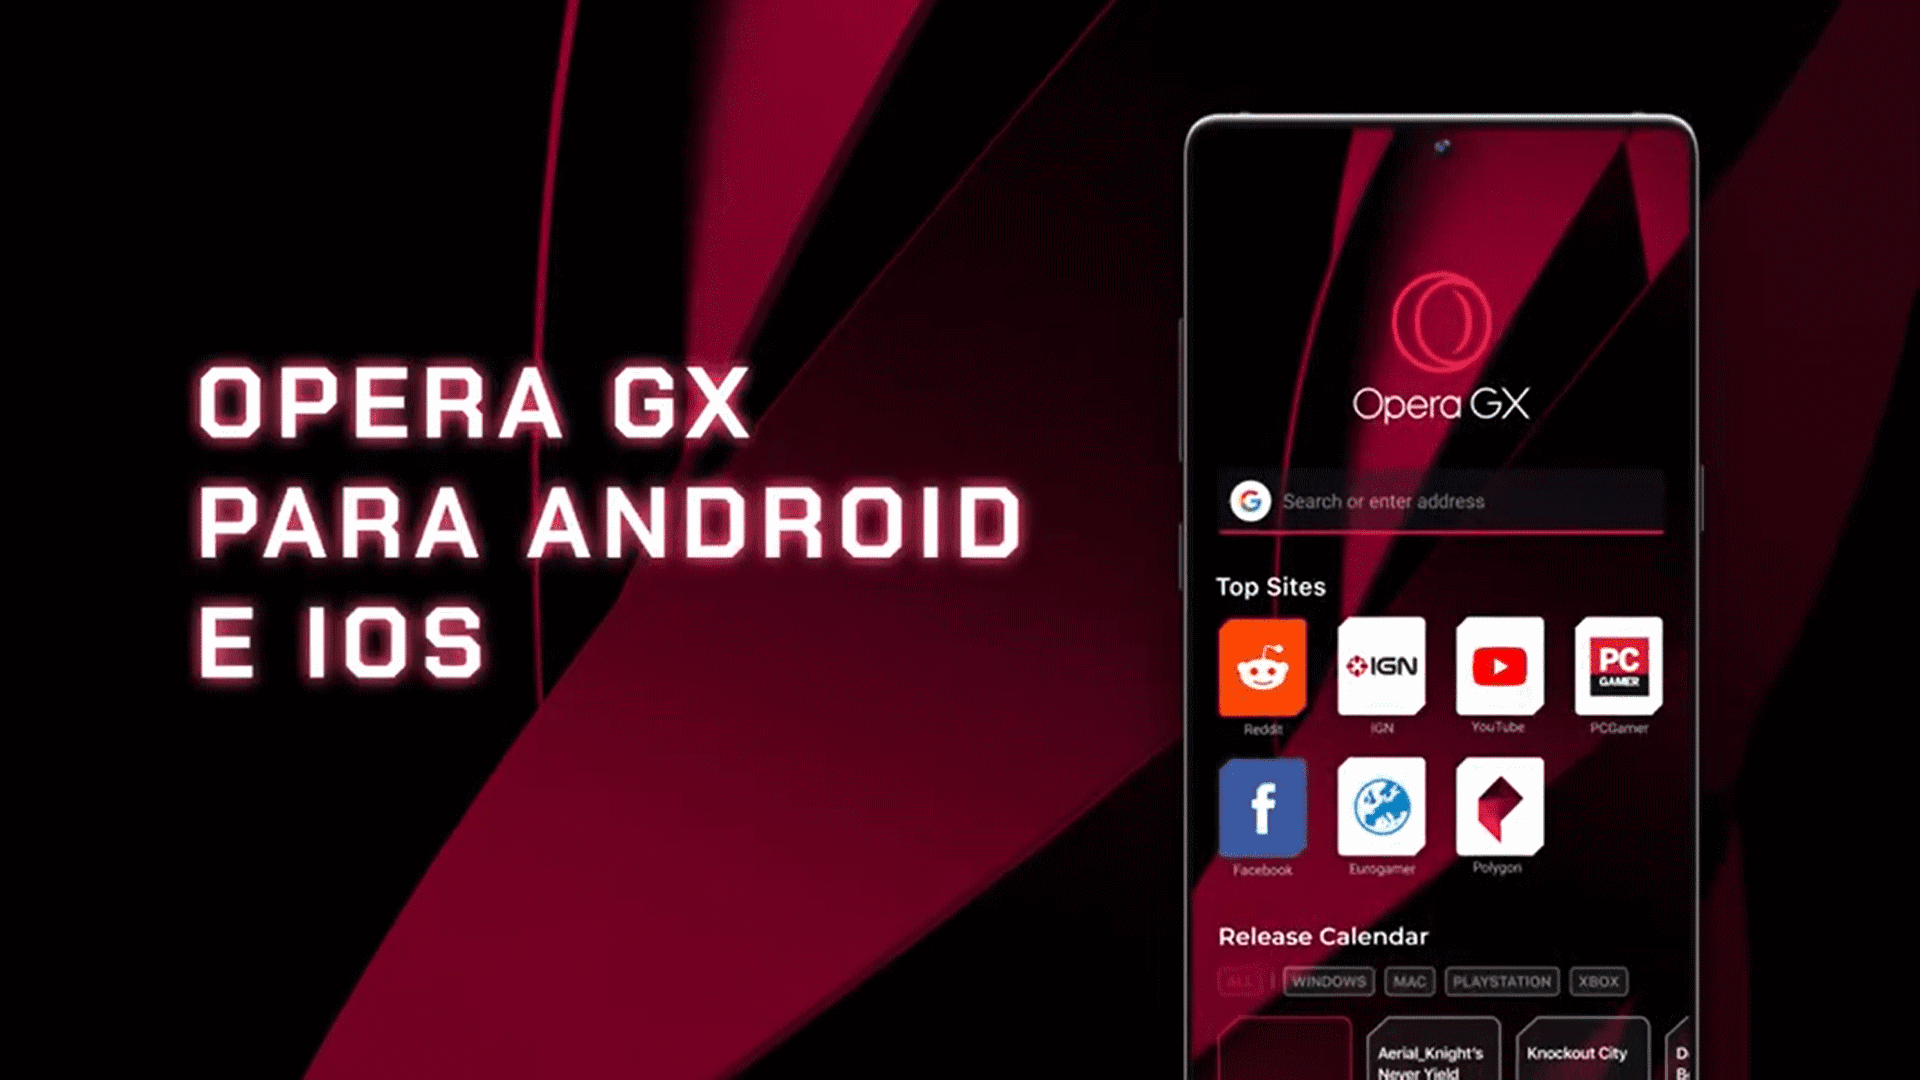 download the new version for android Opera GX 101.0.4843.55